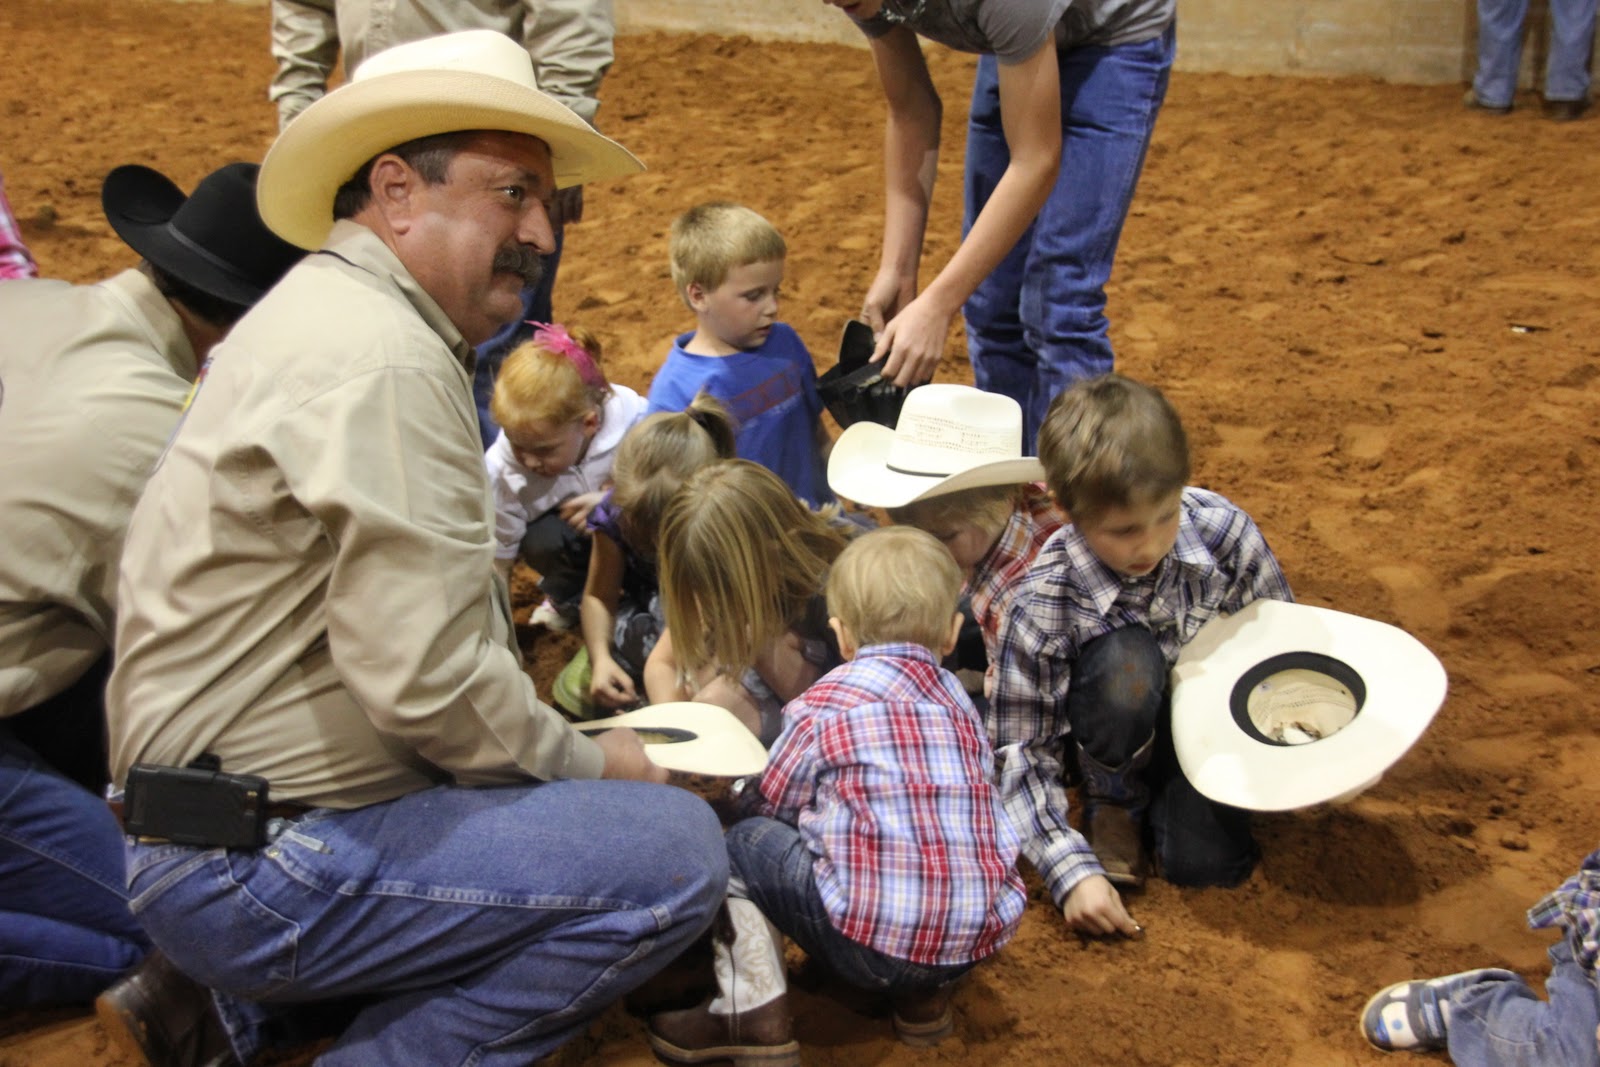 LIFE IS AN ADVENTURE: Rodeo in Graham Texas